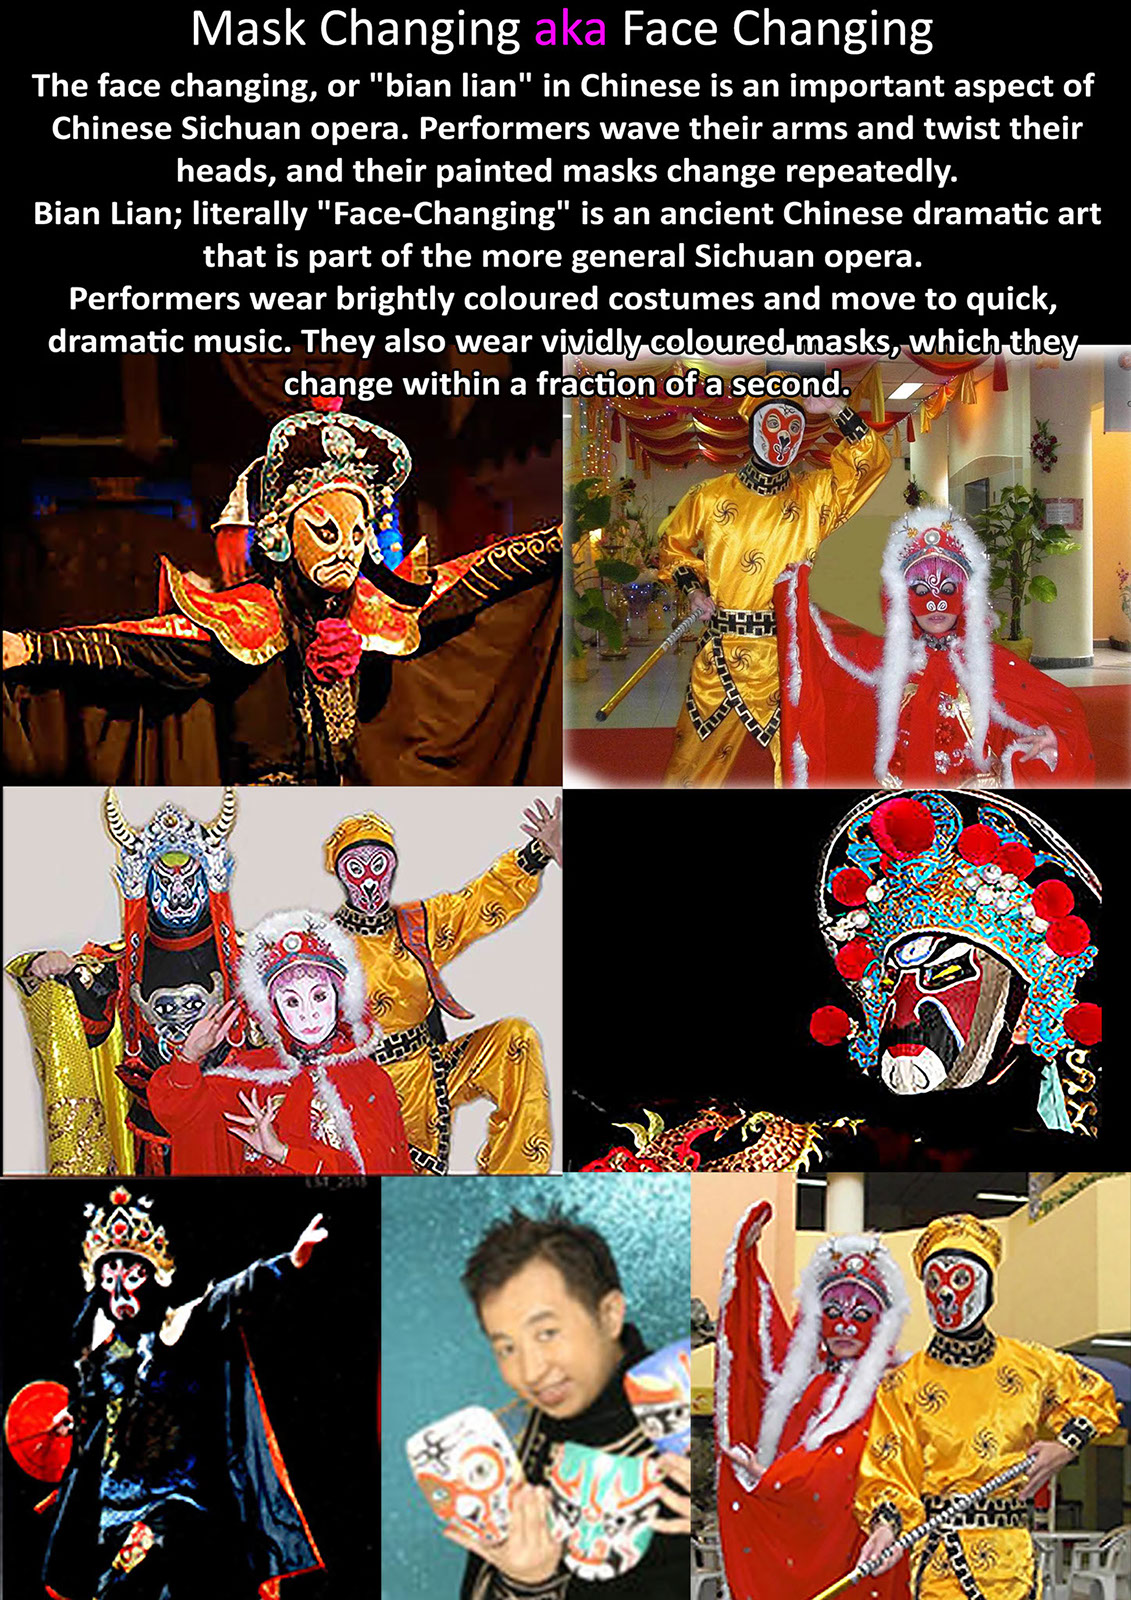 Mask Changing performing Artists; Mask Change, face changing Bian Lian Performers for hire Singapore; Mask and Costume Change Stage Acts; CNY